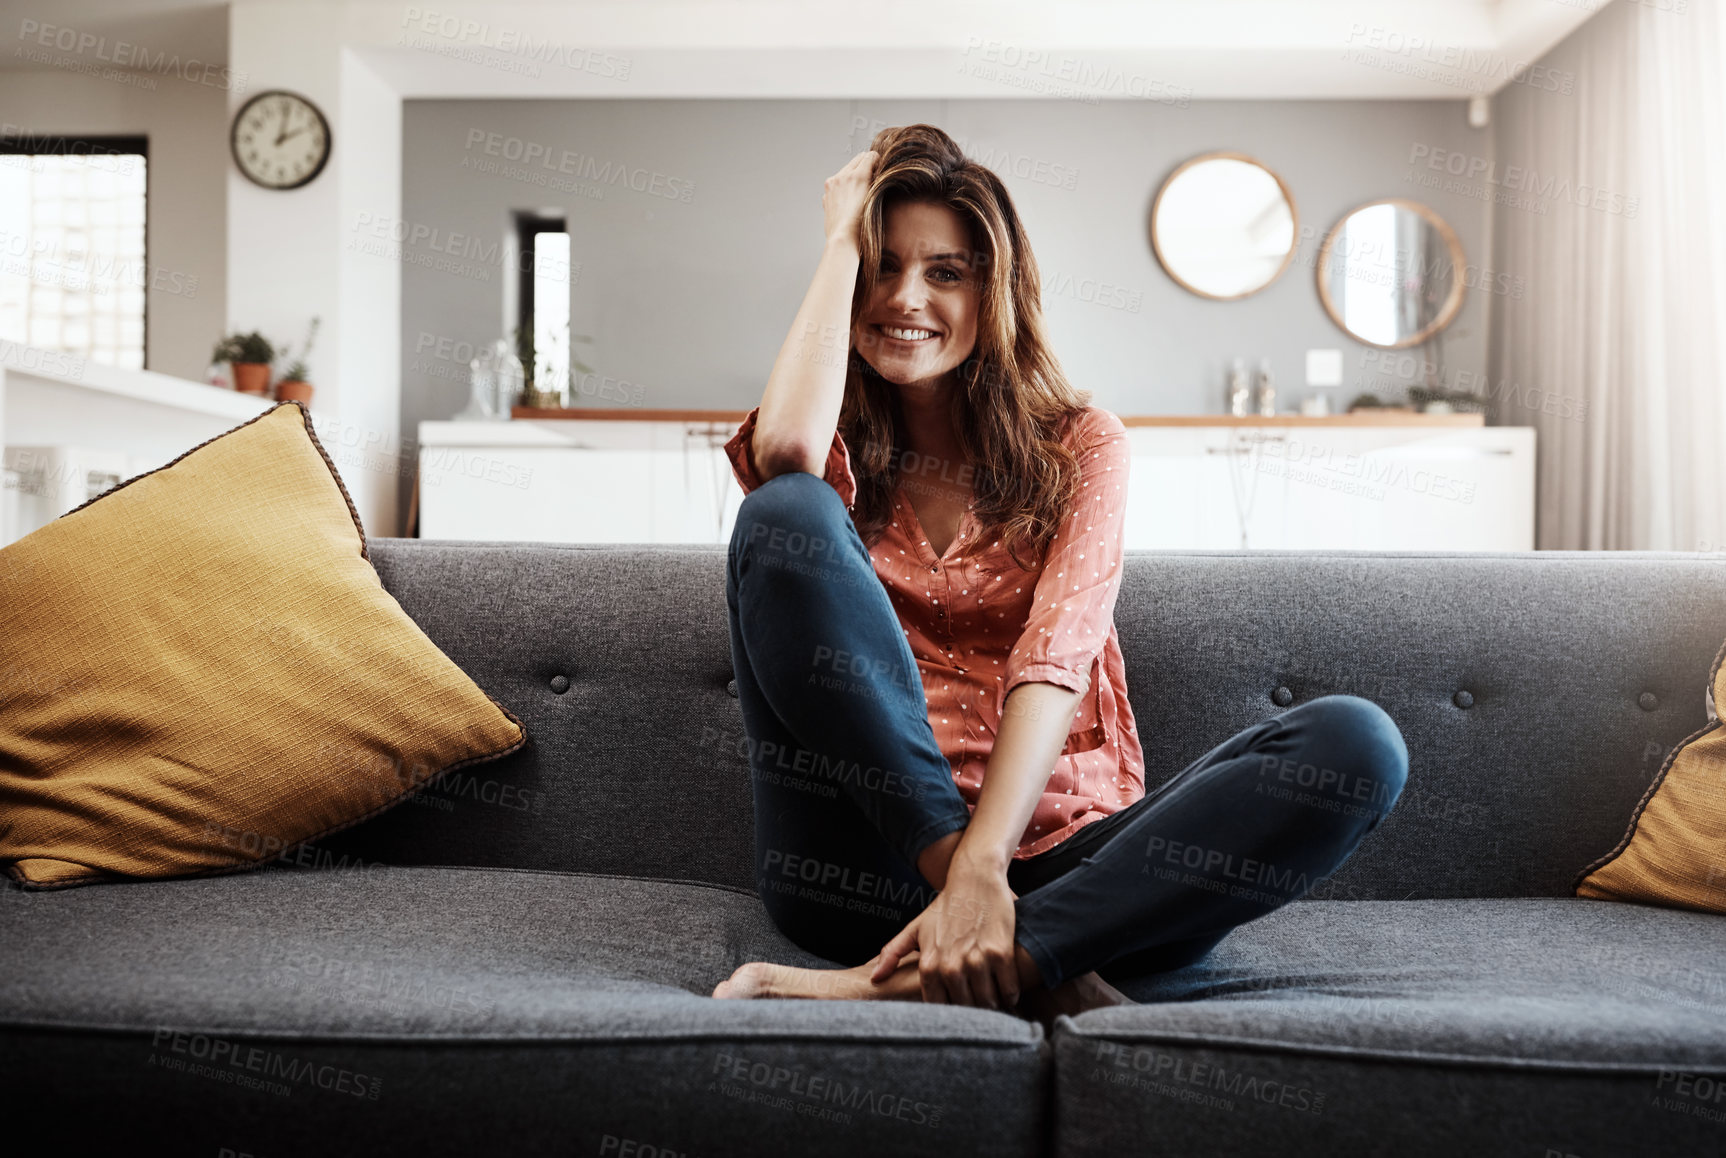 Buy stock photo Portrait of an attractive young woman relaxing on the sofa at home